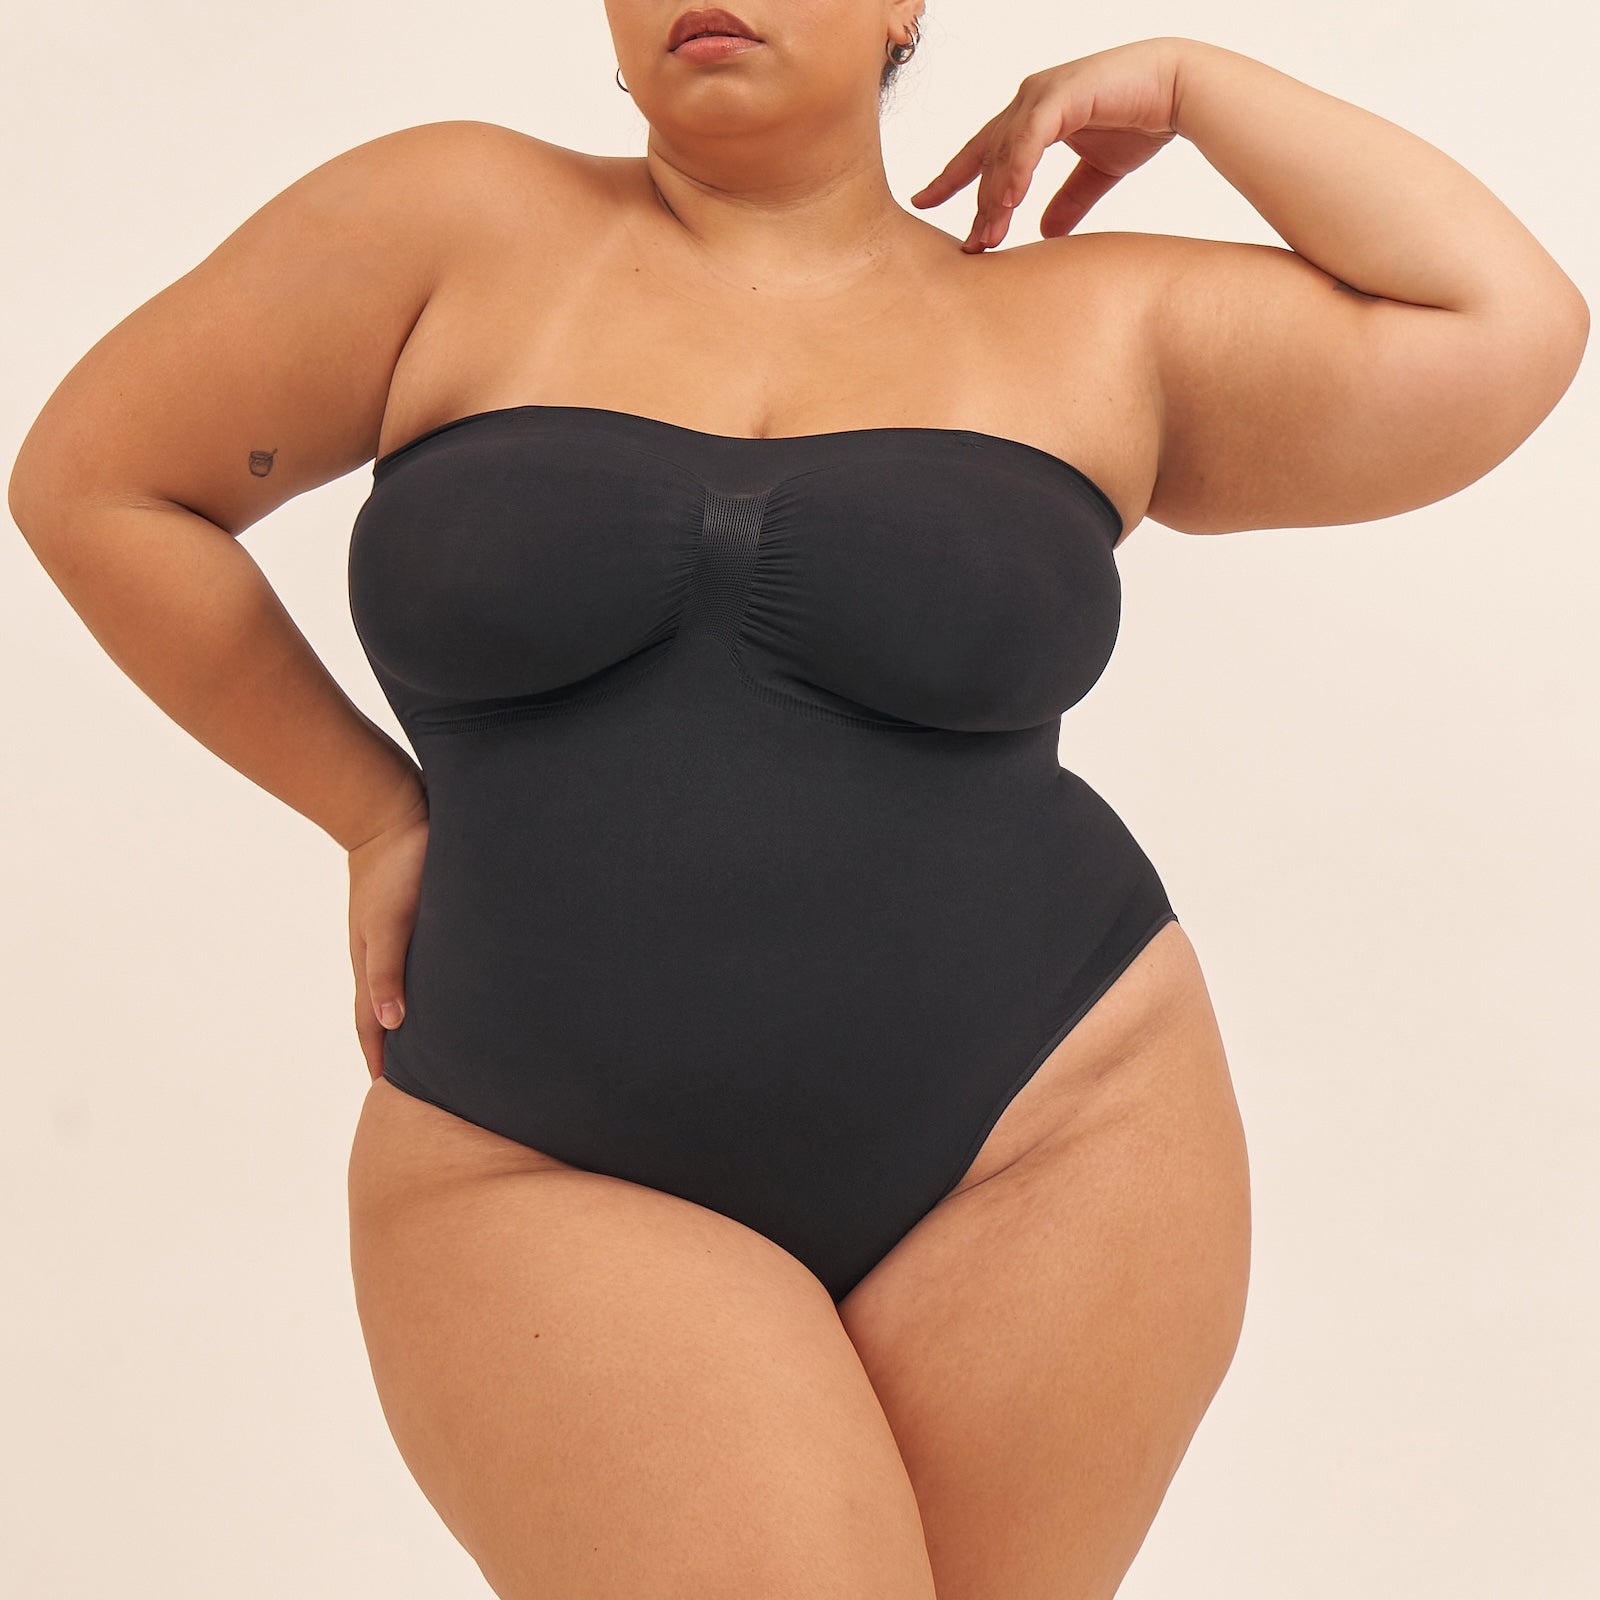 How's the sizing for the Seamless Sculpt Strapless Thong Bodysuit